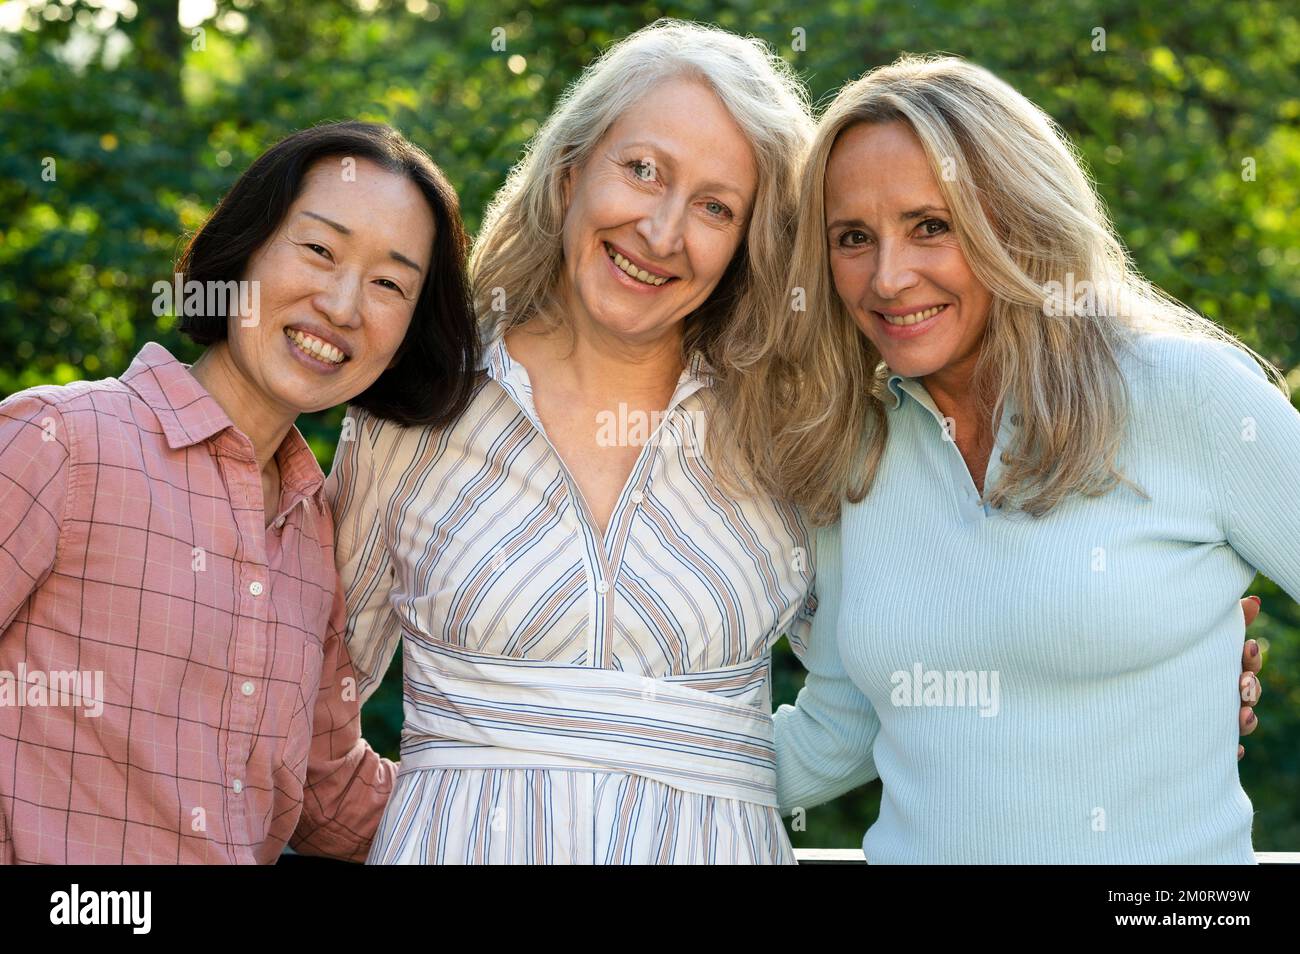 Three senior women posing together for group photo outdoors Stock Photo